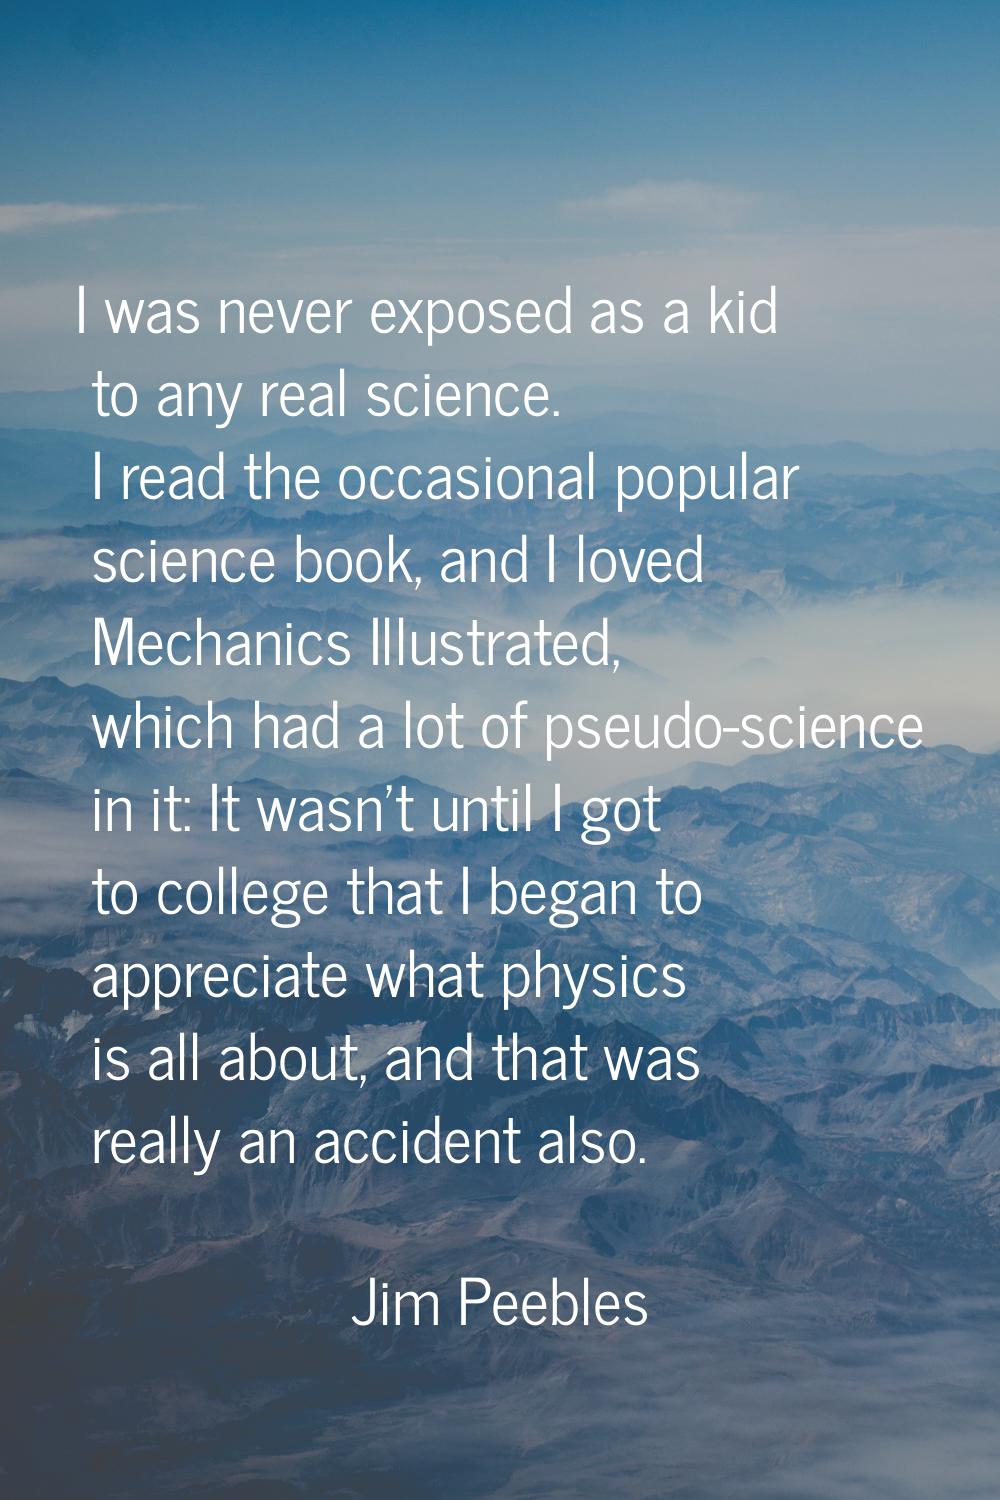 I was never exposed as a kid to any real science. I read the occasional popular science book, and I